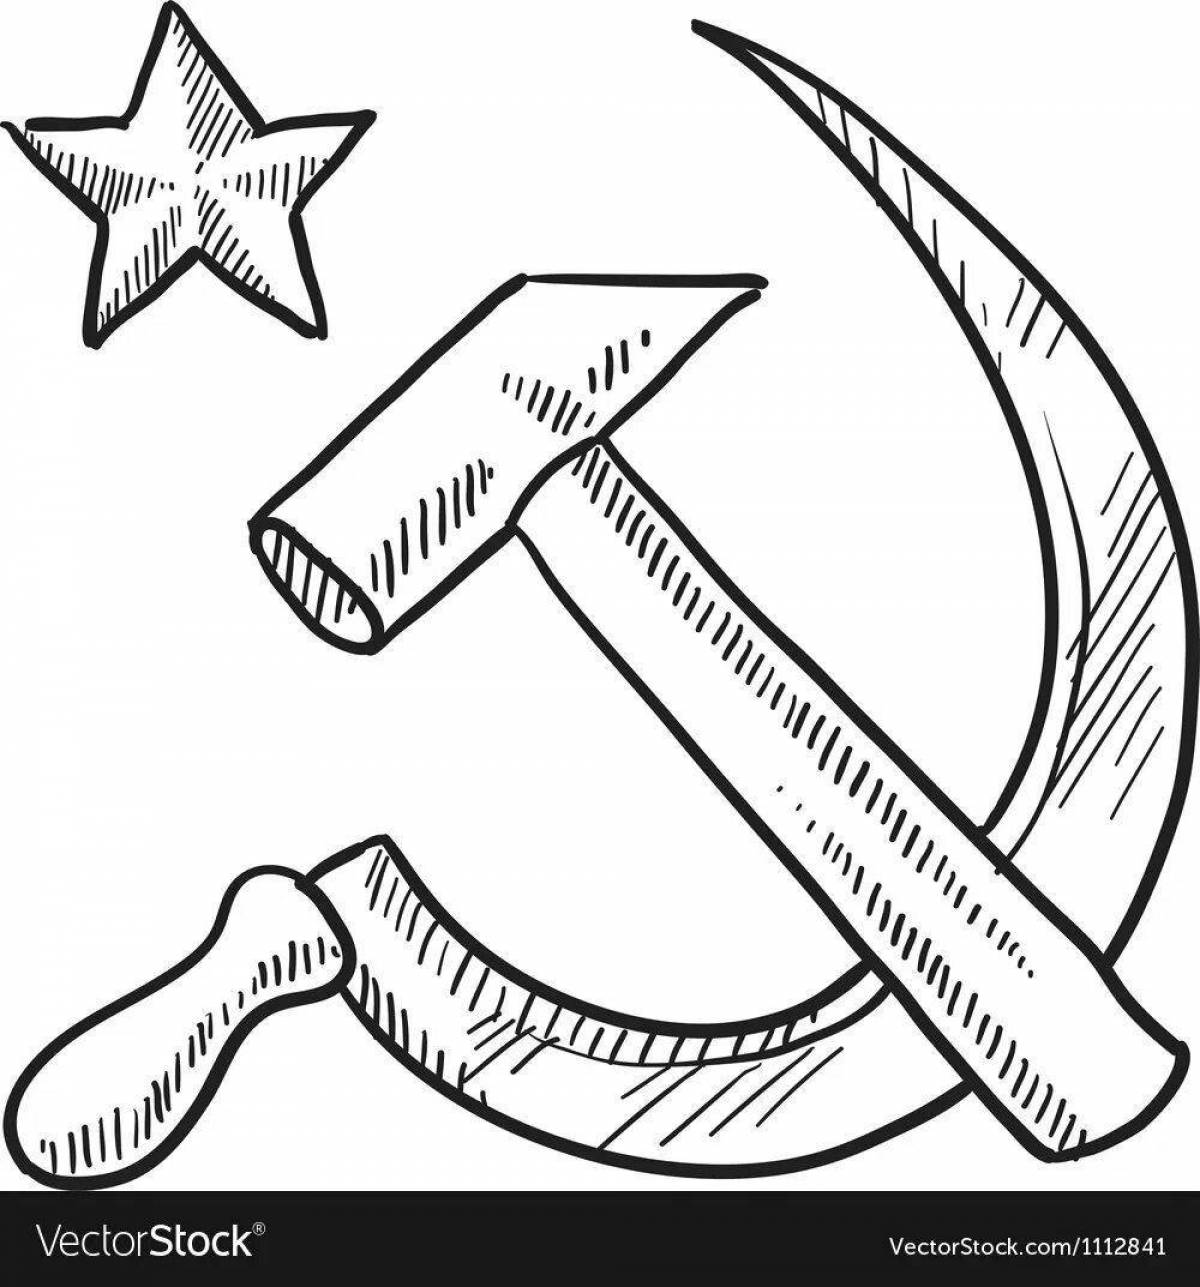 USSR star coloring page